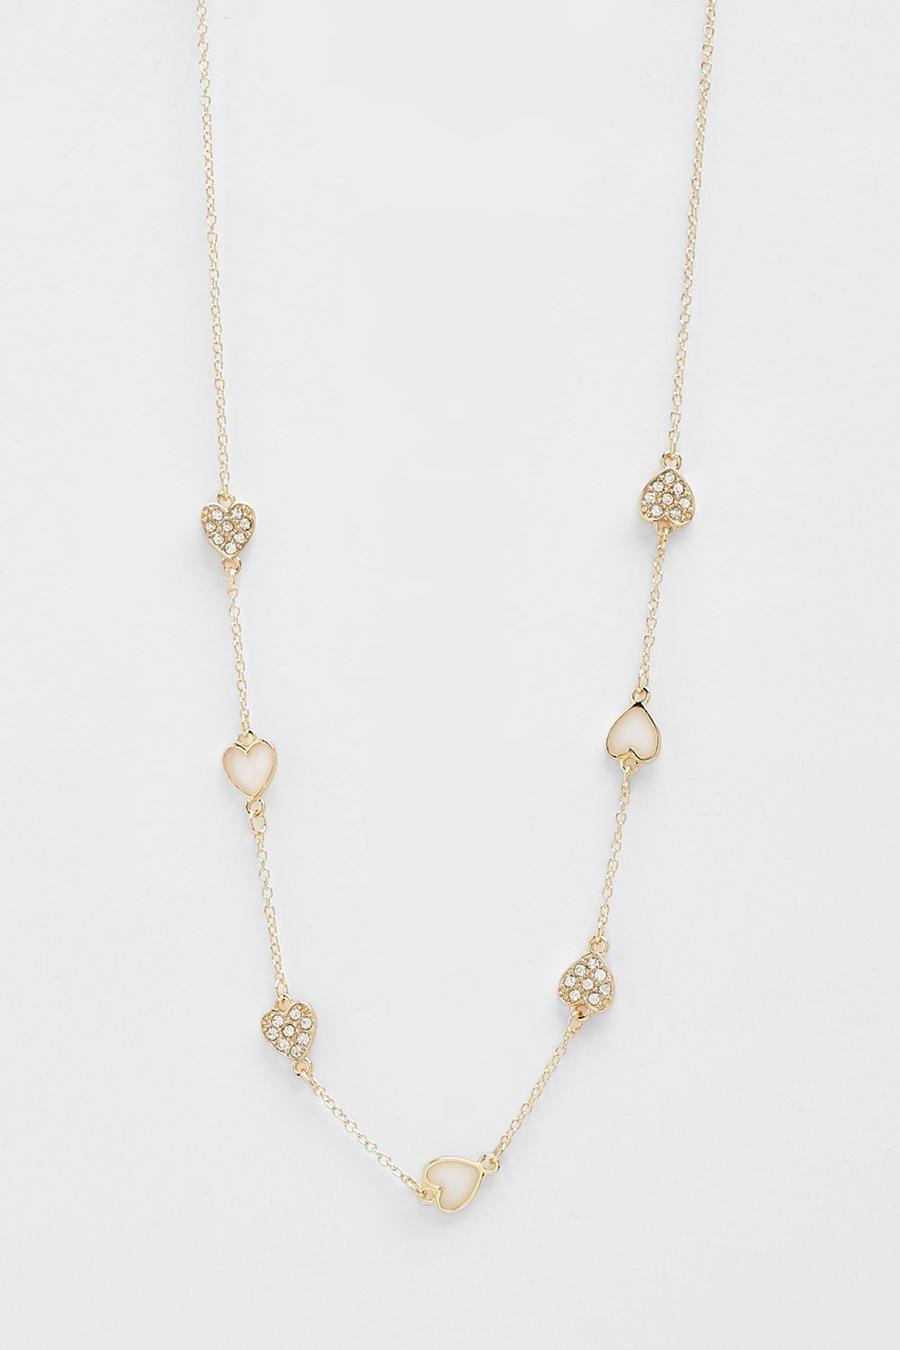 White Enamel Pave Heart Row Necklace